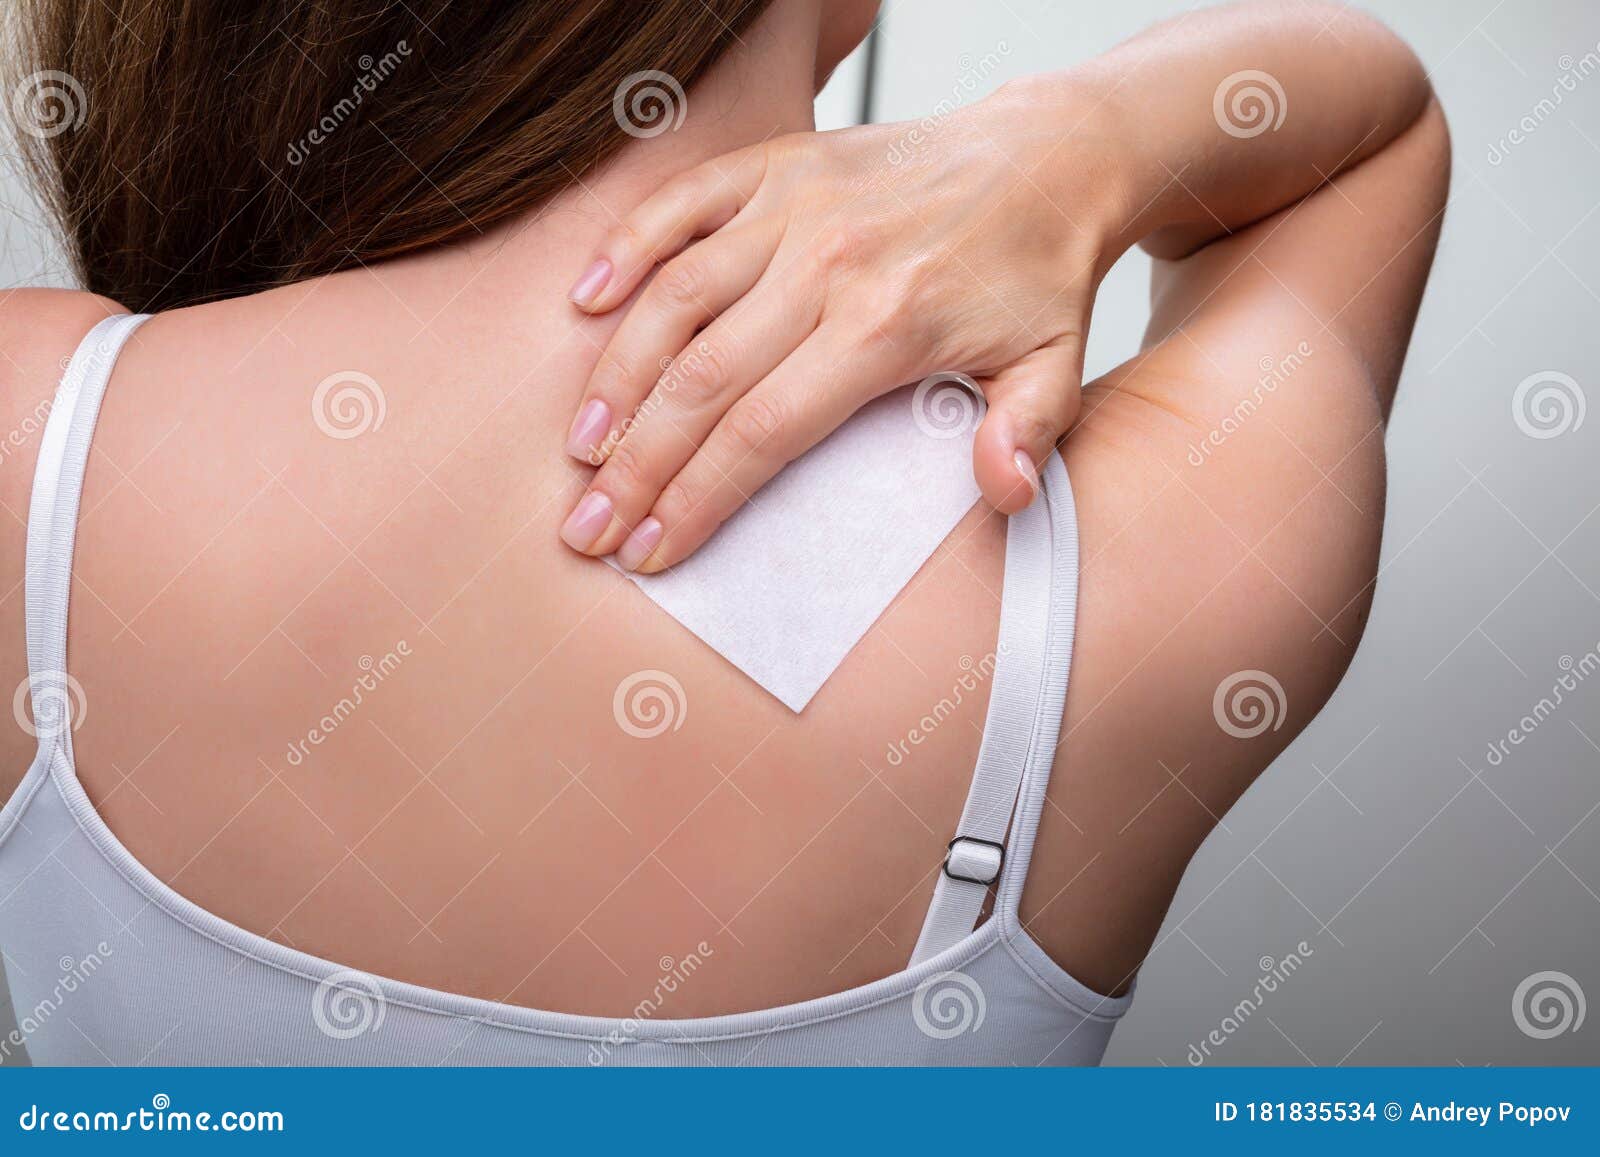 woman with stiff neck applying patch